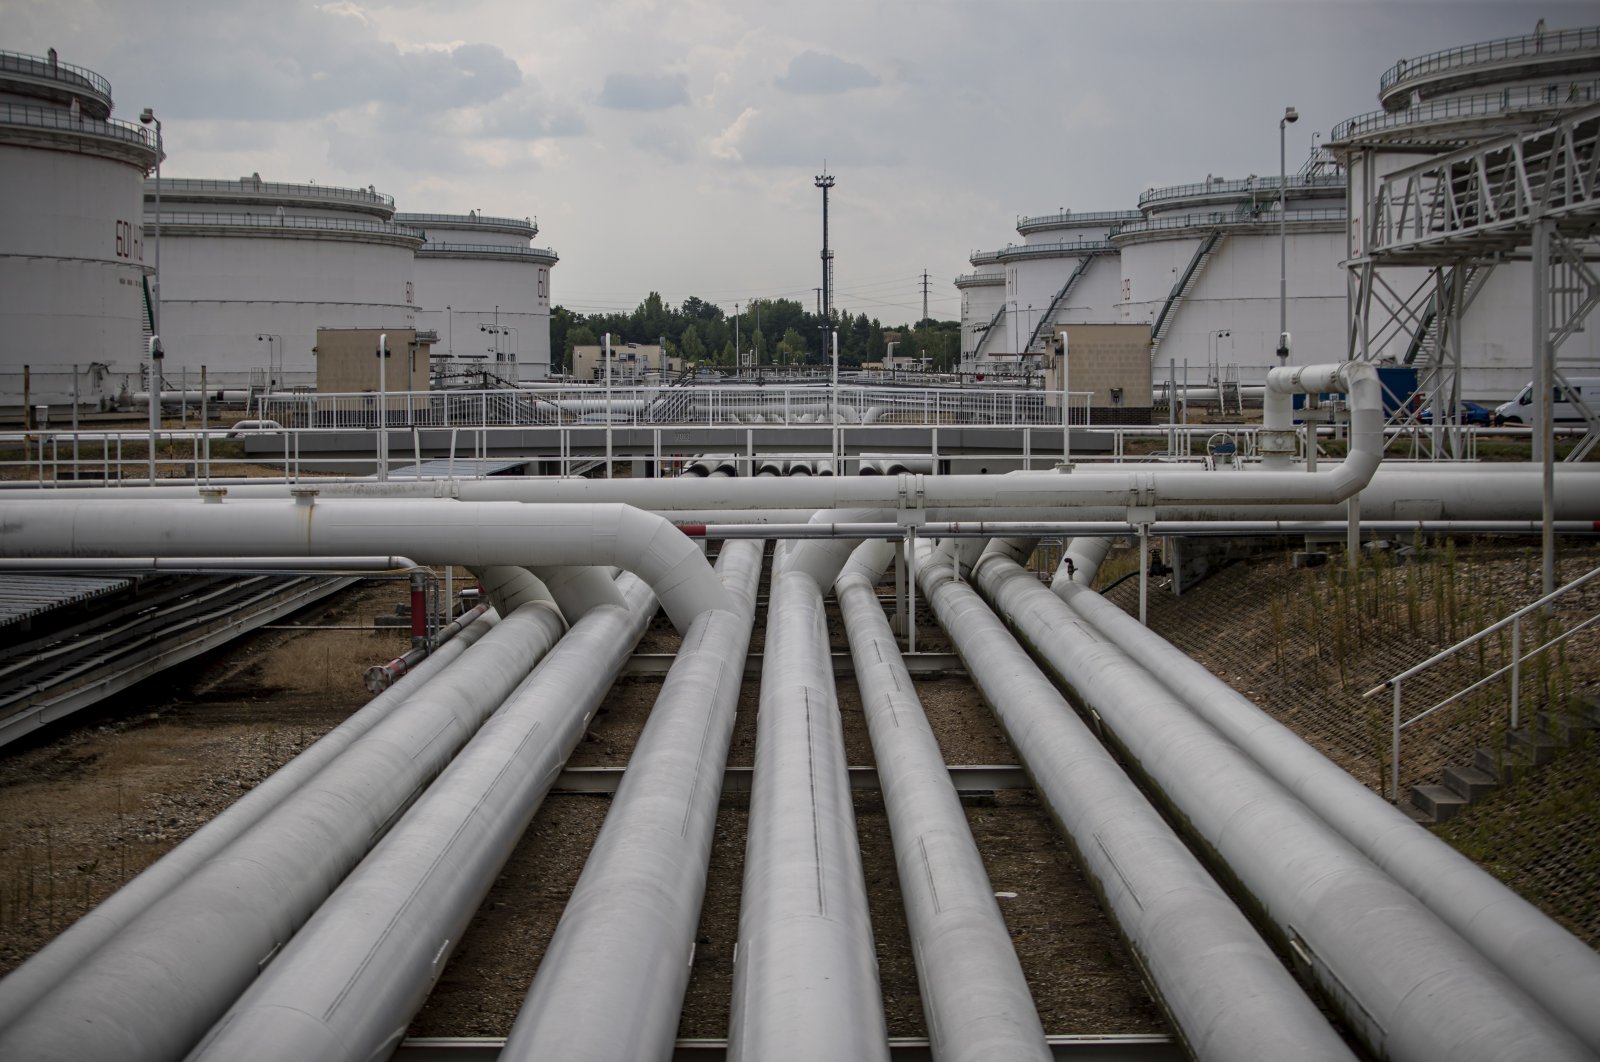 A view of storage tanks and pipelines at the Central oil tank farm operated by Mero CR near Nelahozeves, Czech Republic, Aug. 15, 2022. (EPA Photo)